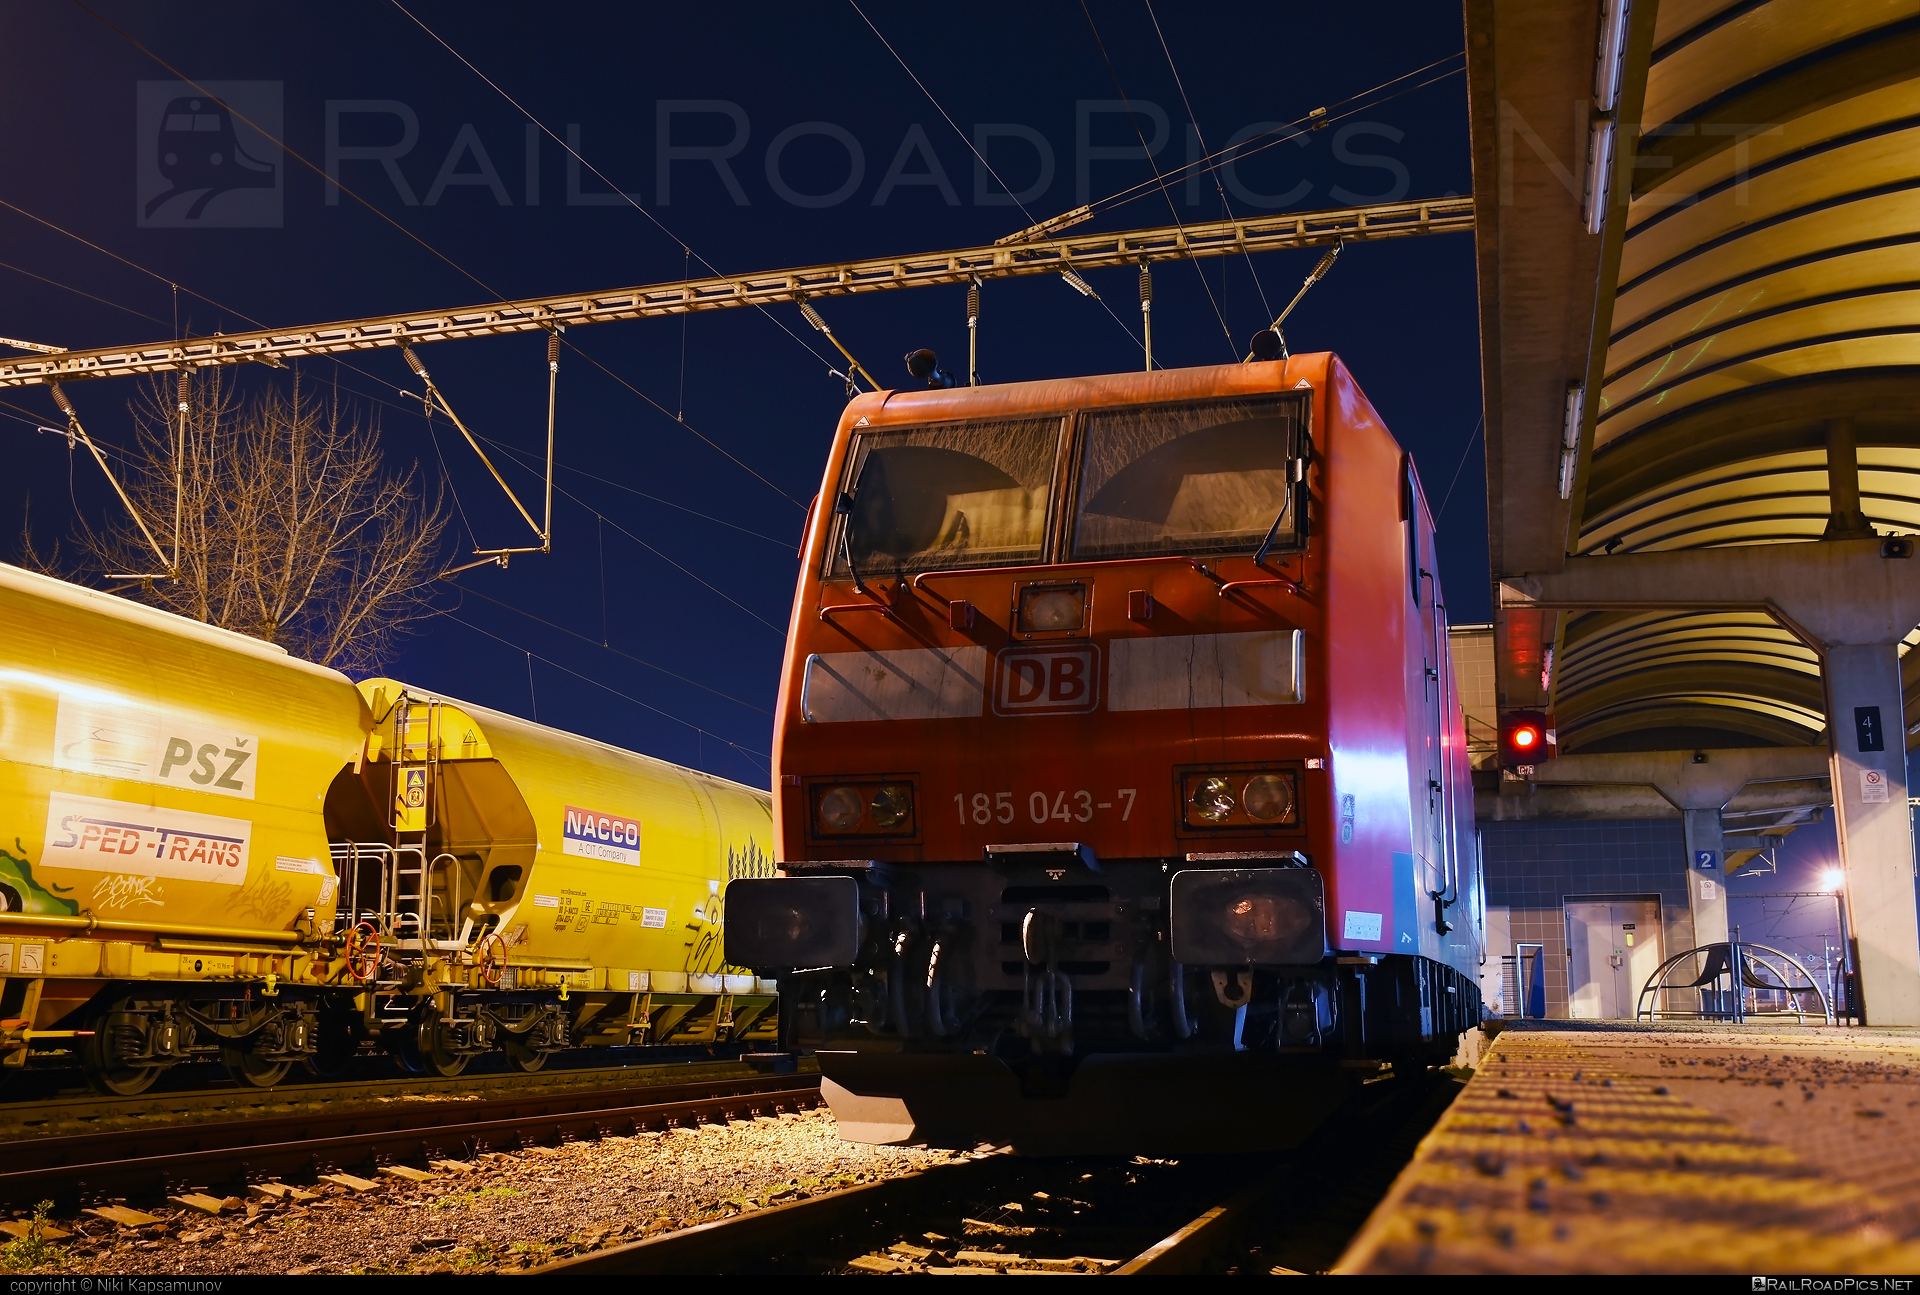 Bombardier TRAXX F140 AC1 - 185 043-7 operated by DB Cargo AG #bombardier #bombardiertraxx #db #dbcargo #dbcargoag #deutschebahn #traxx #traxxf140 #traxxf140ac #traxxf140ac1